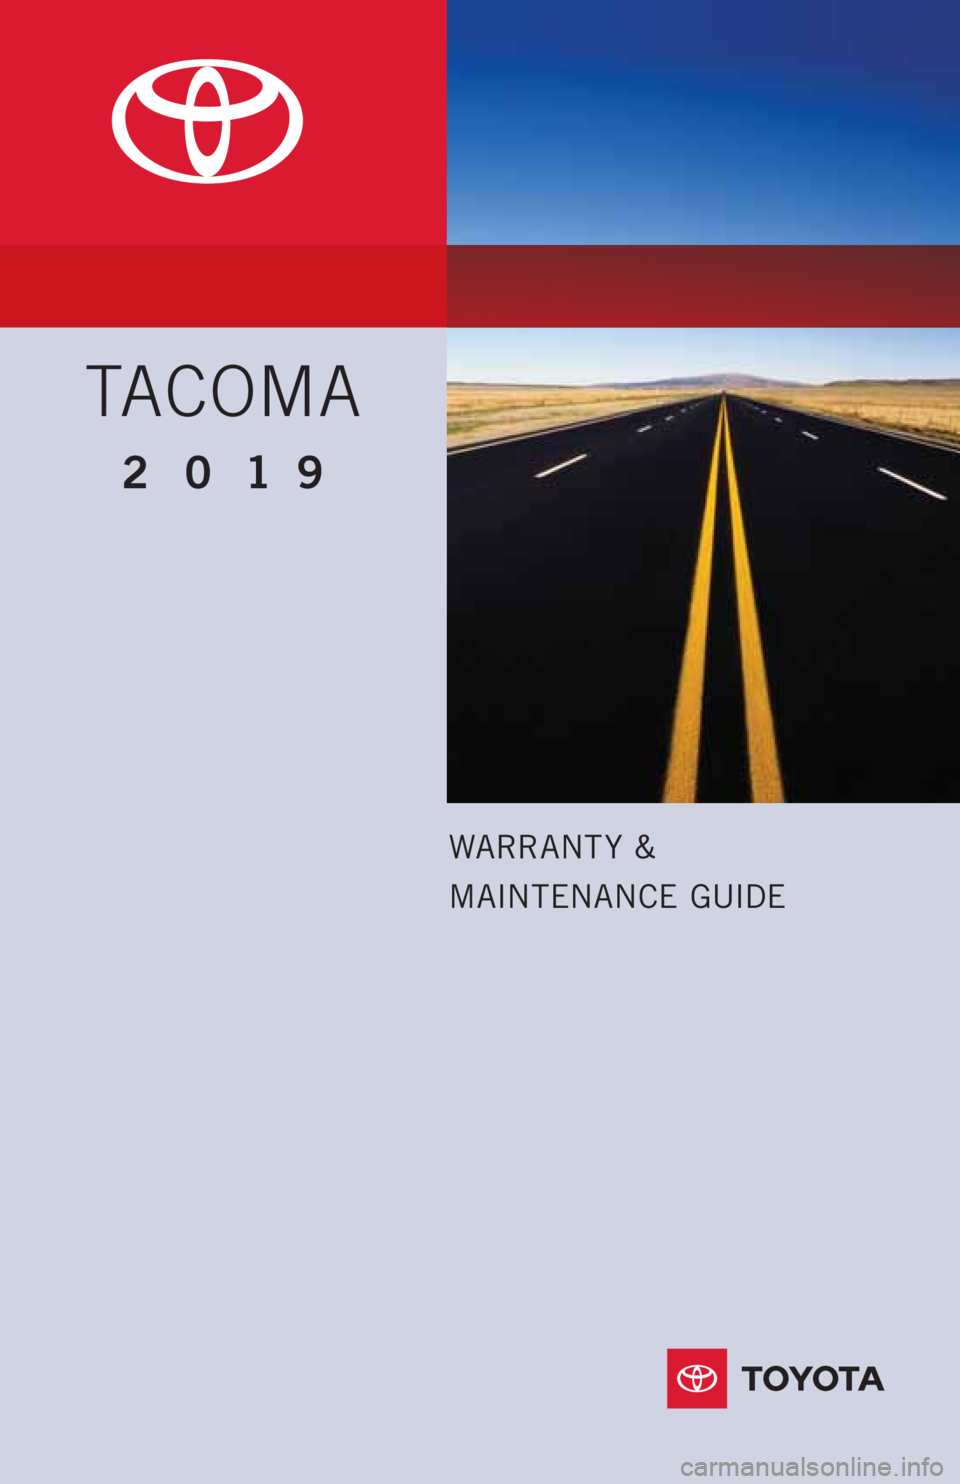 TOYOTA TACOMA 2019  Warranties & Maintenance Guides (in English) WARRANT Y  &
MAINTENANCE GUIDE
TACOMA
2019        
 
  